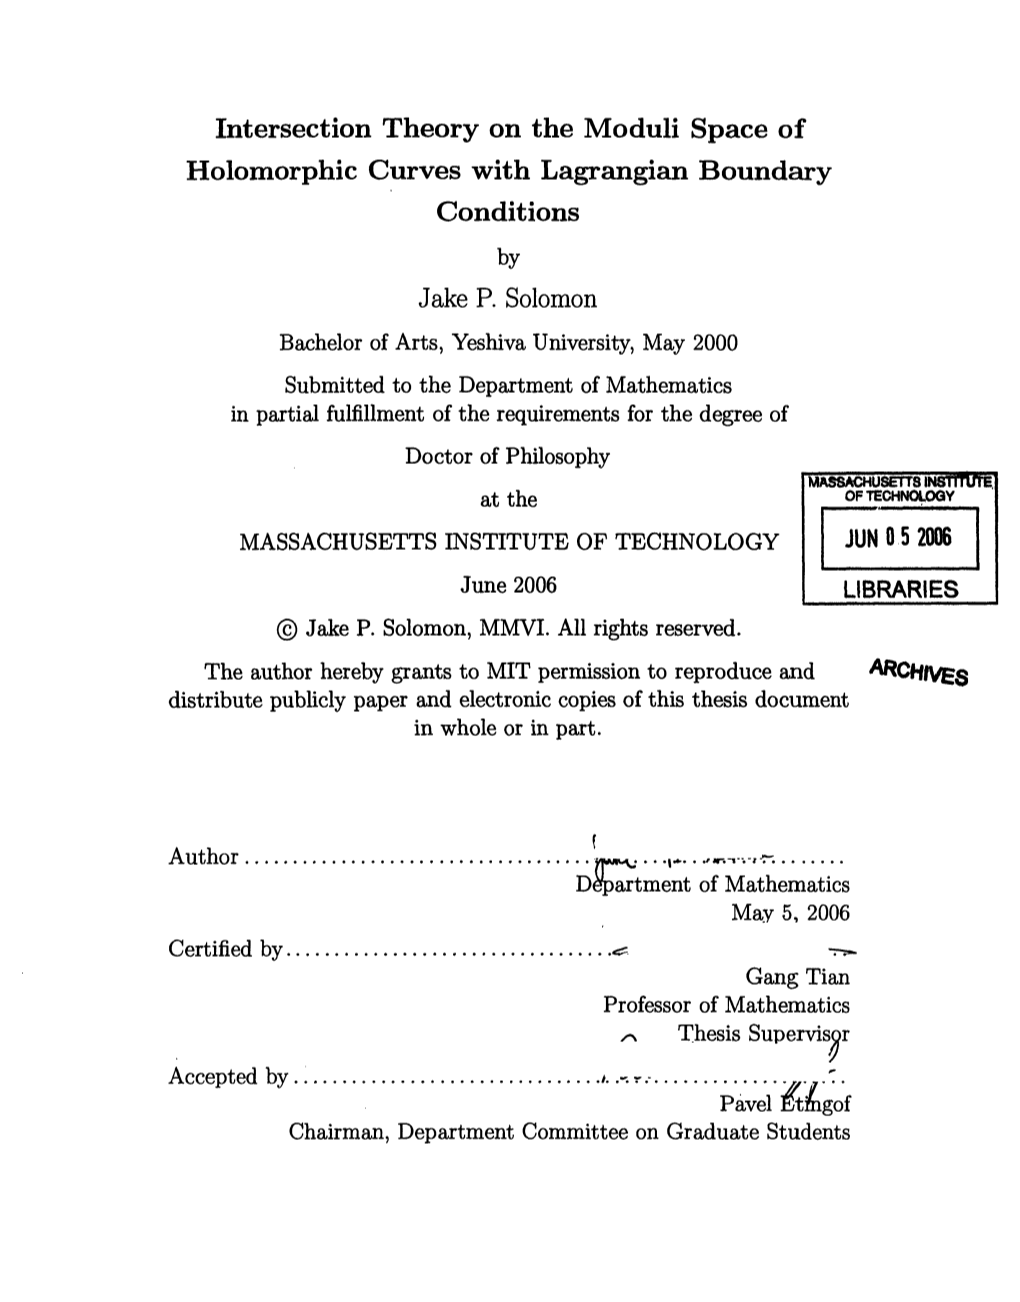 Intersection Theory on the Moduli Space of Holomorphic Curves with Lagrangian Boundary Conditions by Jake P